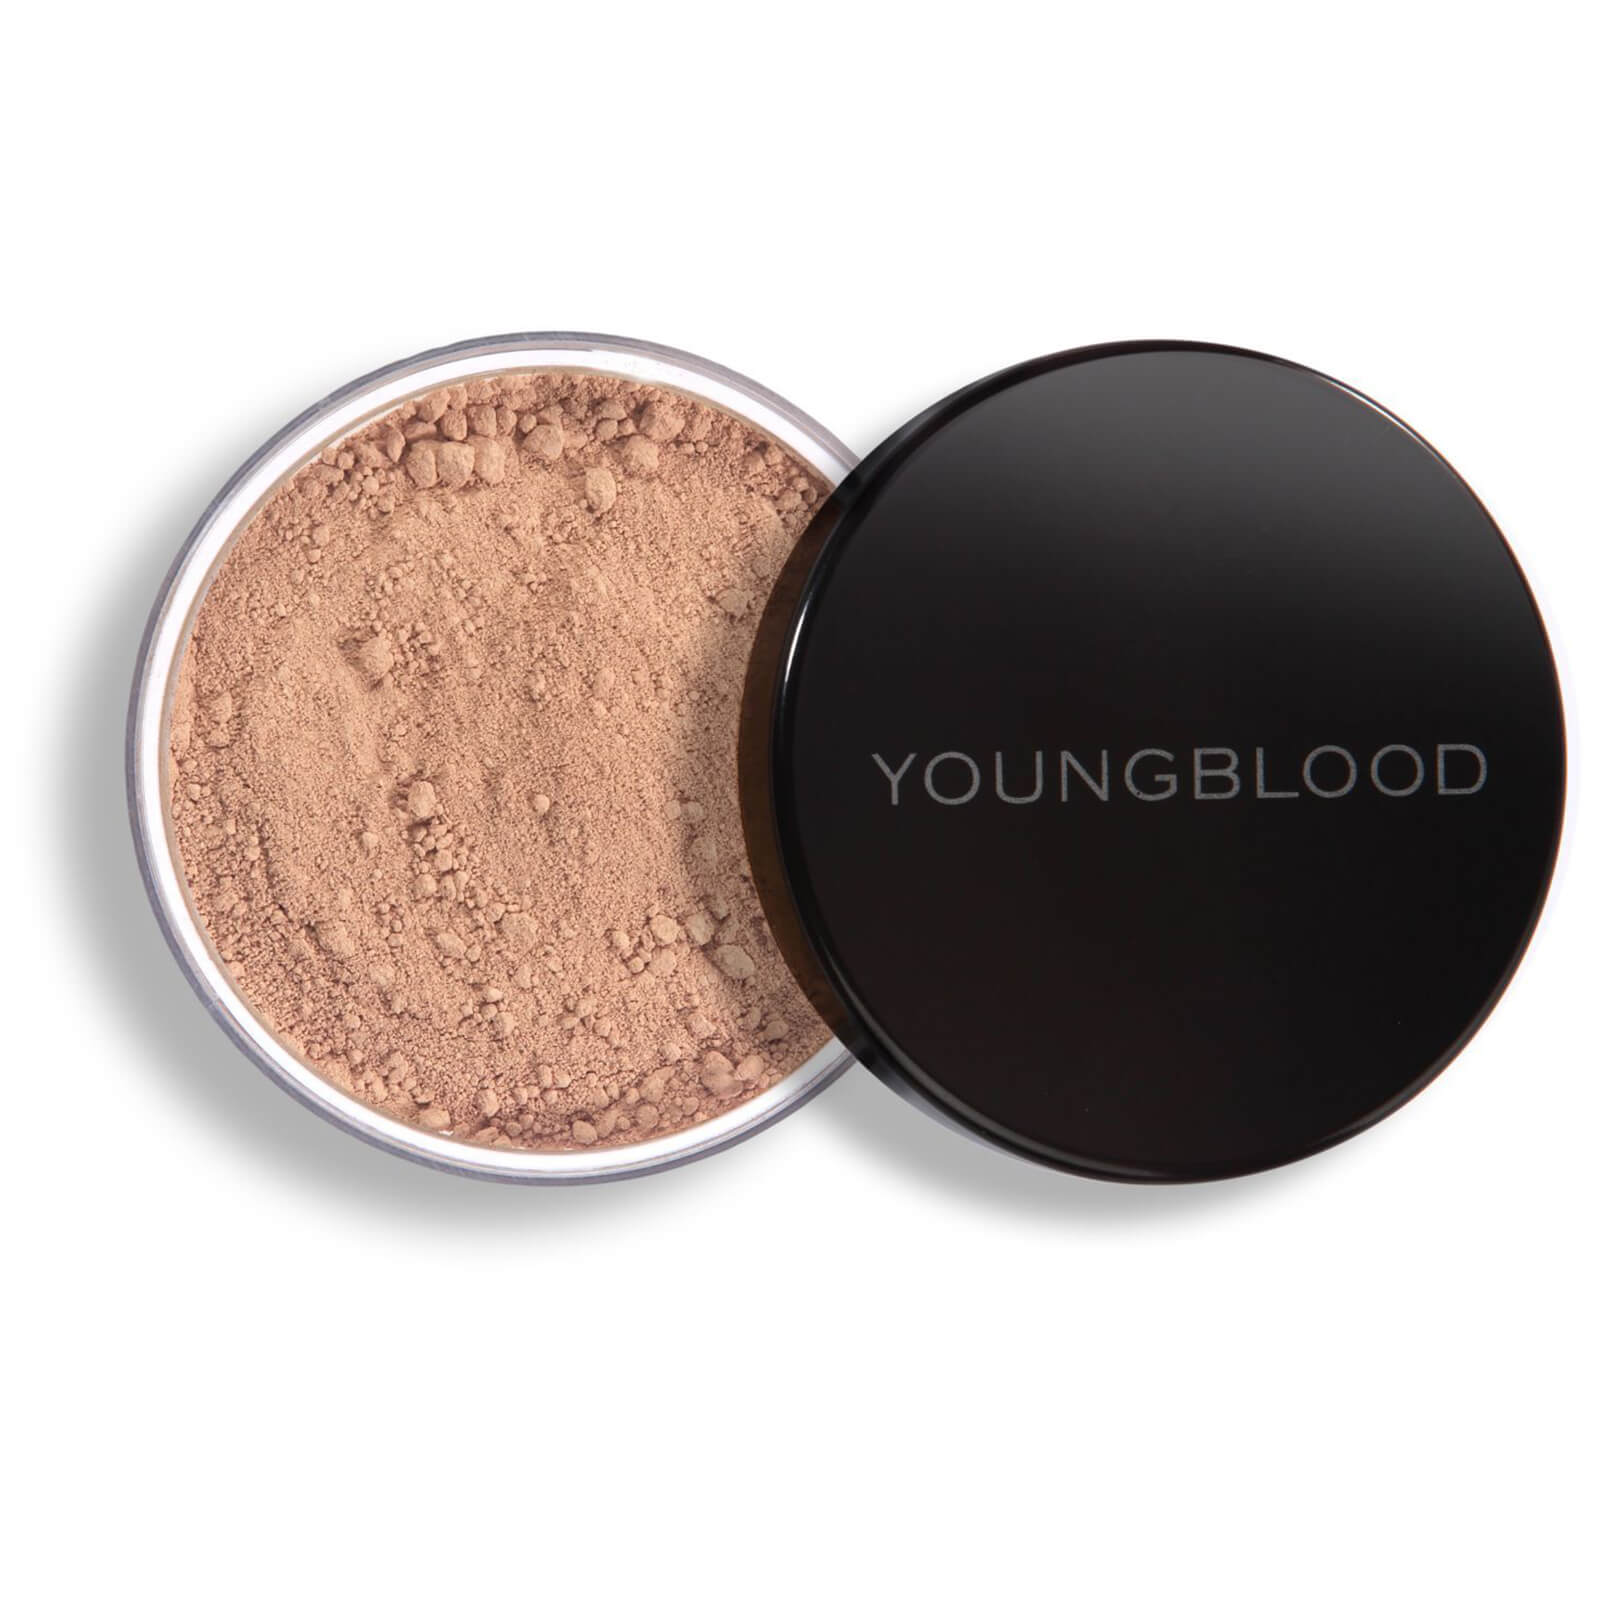 Youngblood Mineral Cosmetics Youngblood Natural Mineral Loose Foundation 10g (Various Shades) - Honey